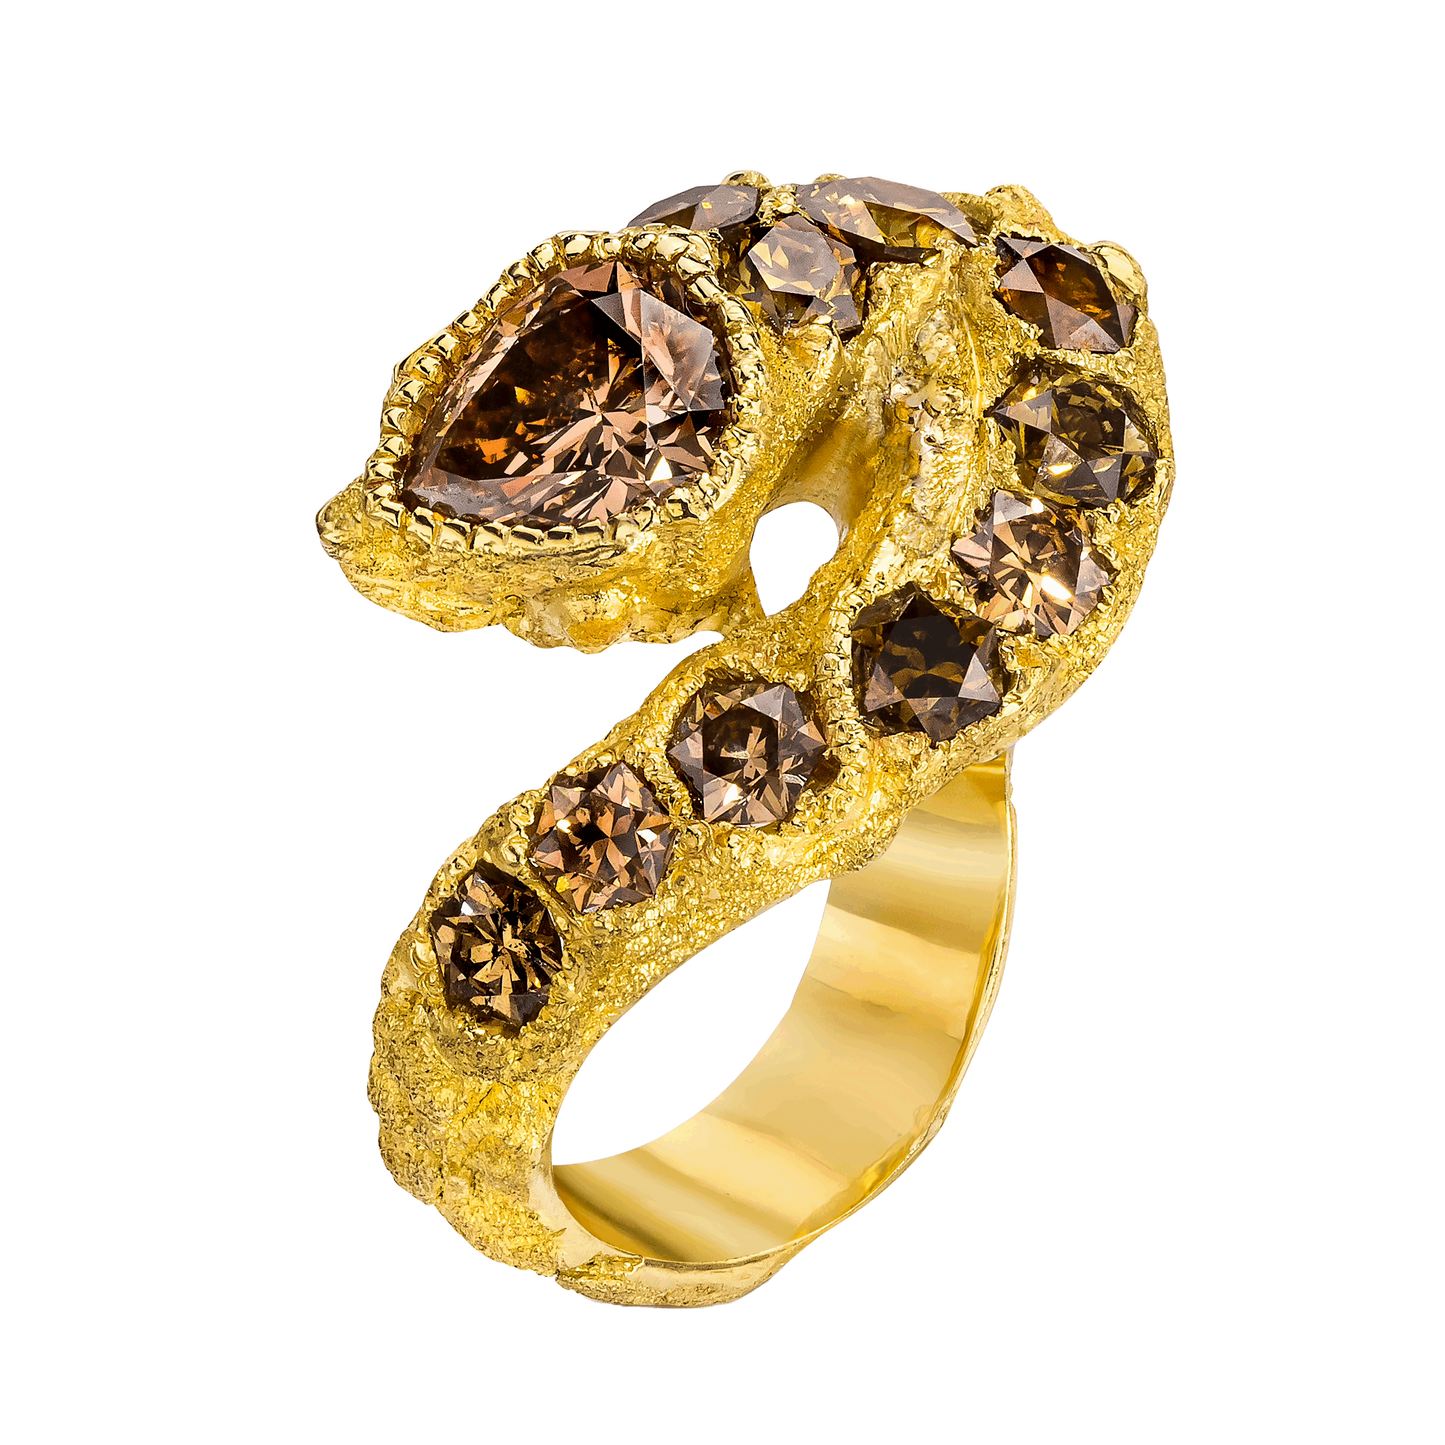 SERPENT RING, 2.40 CTTW, 1 PEAR AND 10 HONEYCOMB DIAMONDS, 18K YELLOW